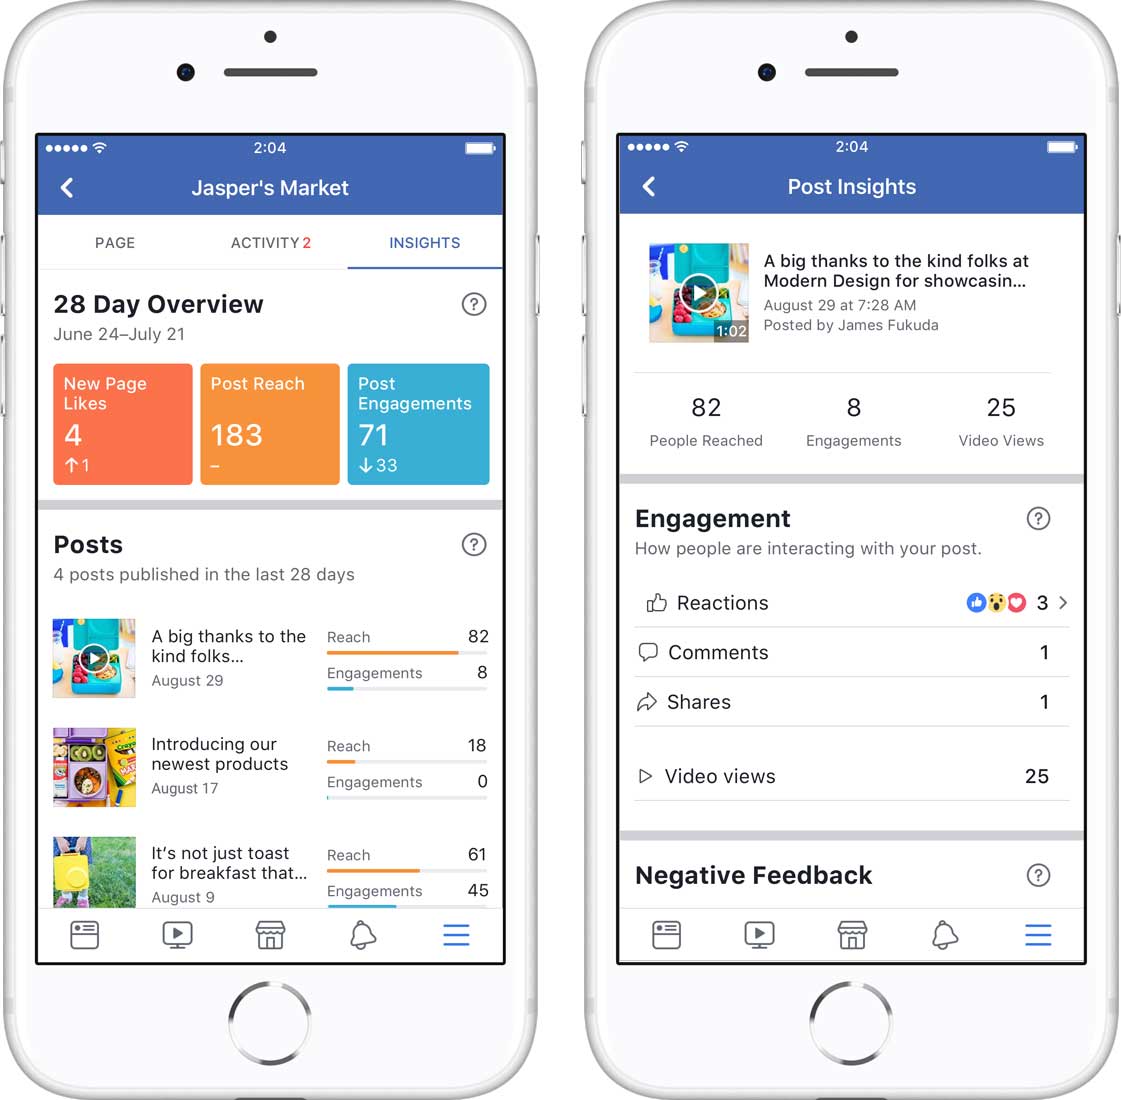 Facebook to Begin Measuring Post Reach Based on Actual Views